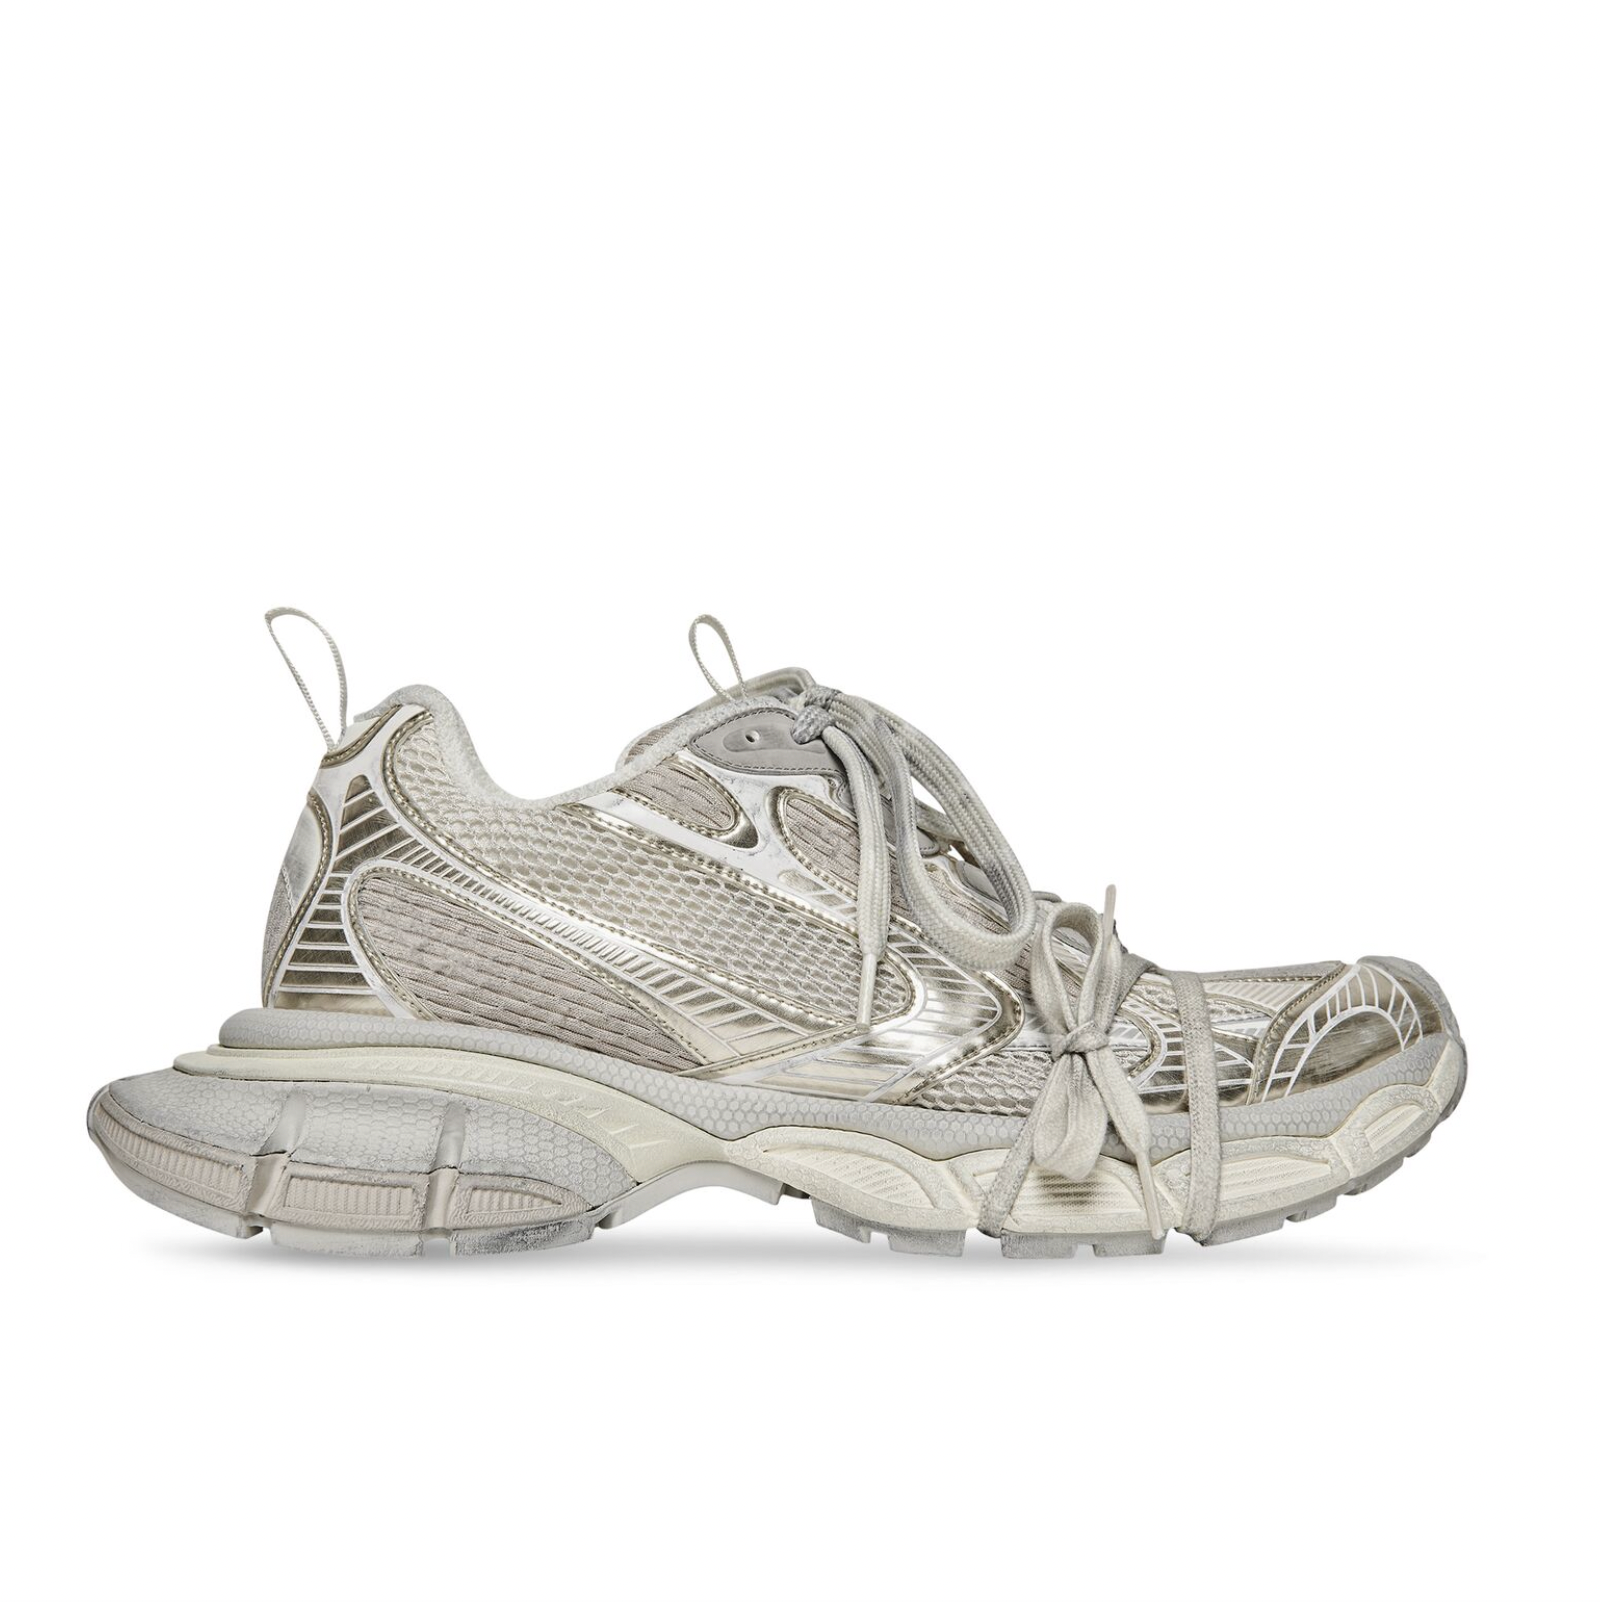 How Much Are Balenciaga Sneakers | lupon.gov.ph